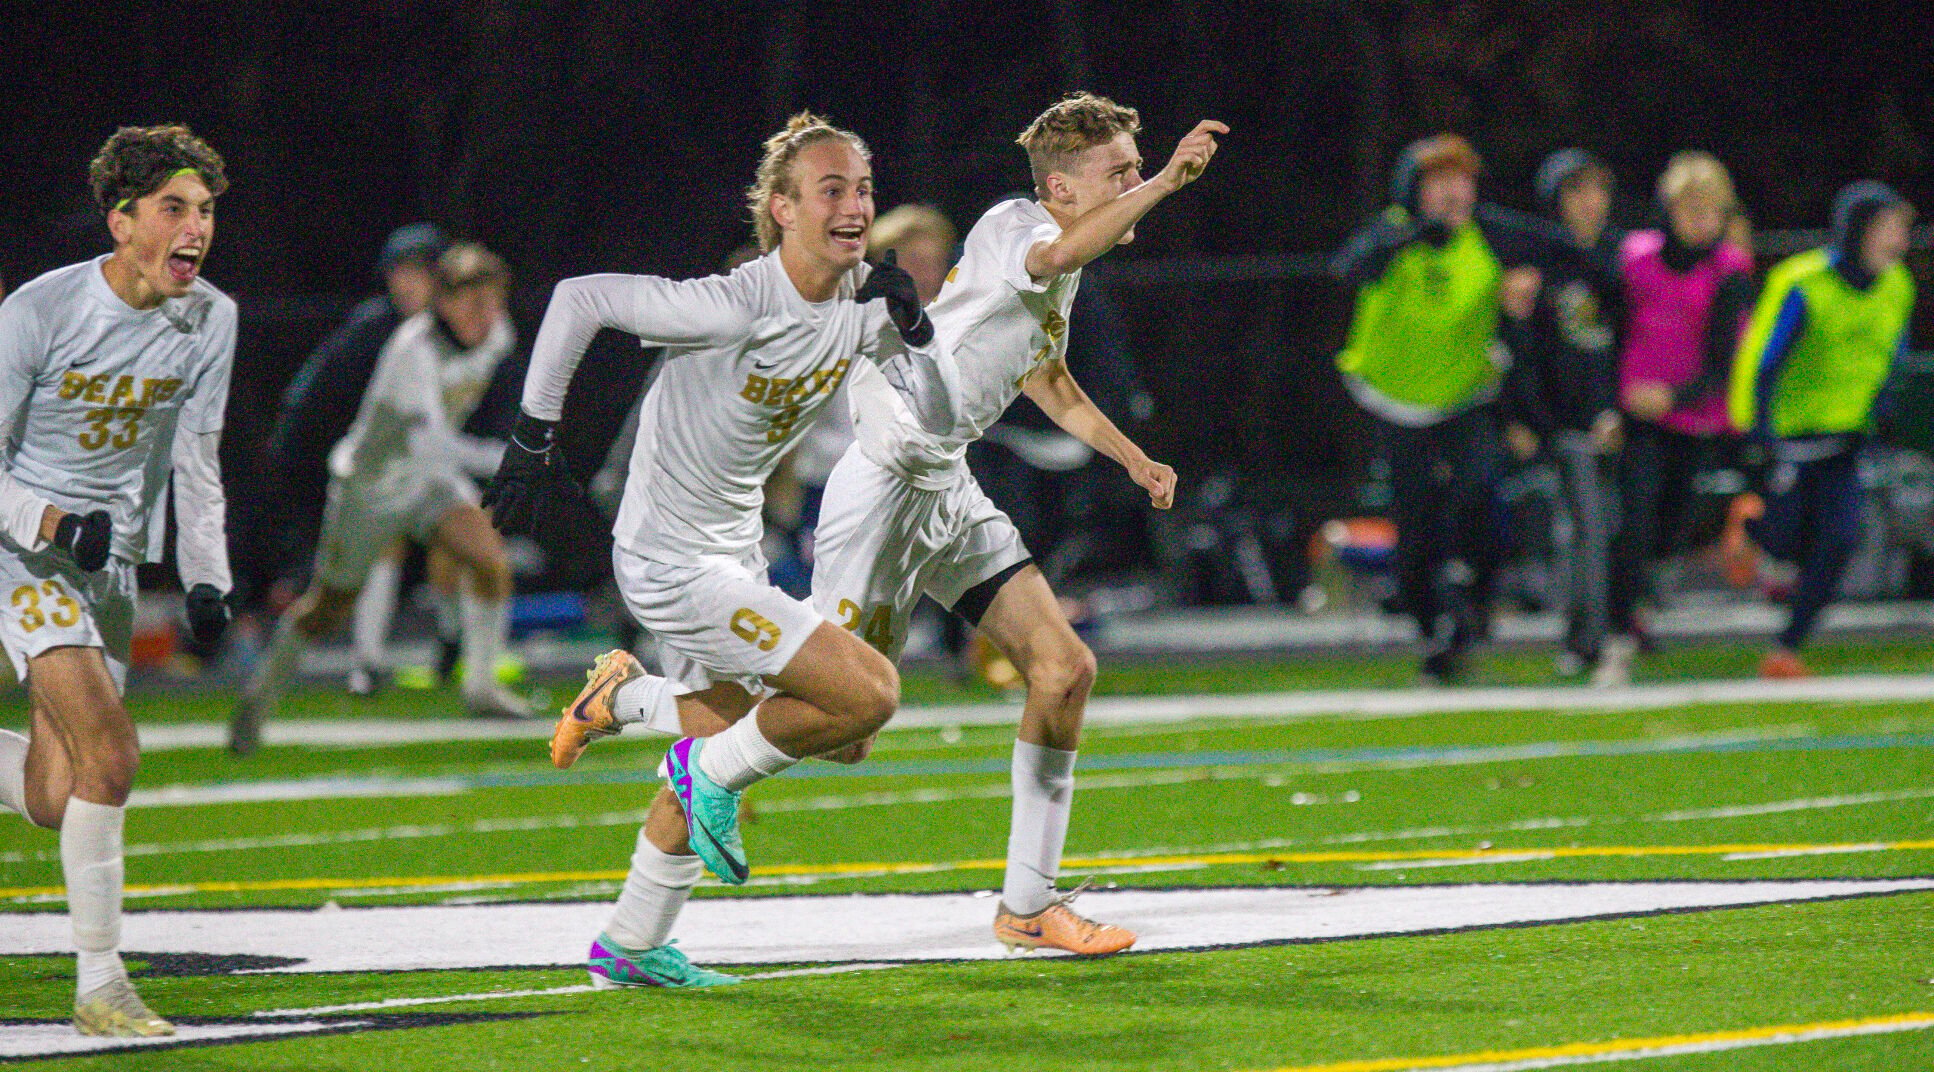 Stonington Boys Soccer Team Advances to Class M Final in Penalty Shootout Victory